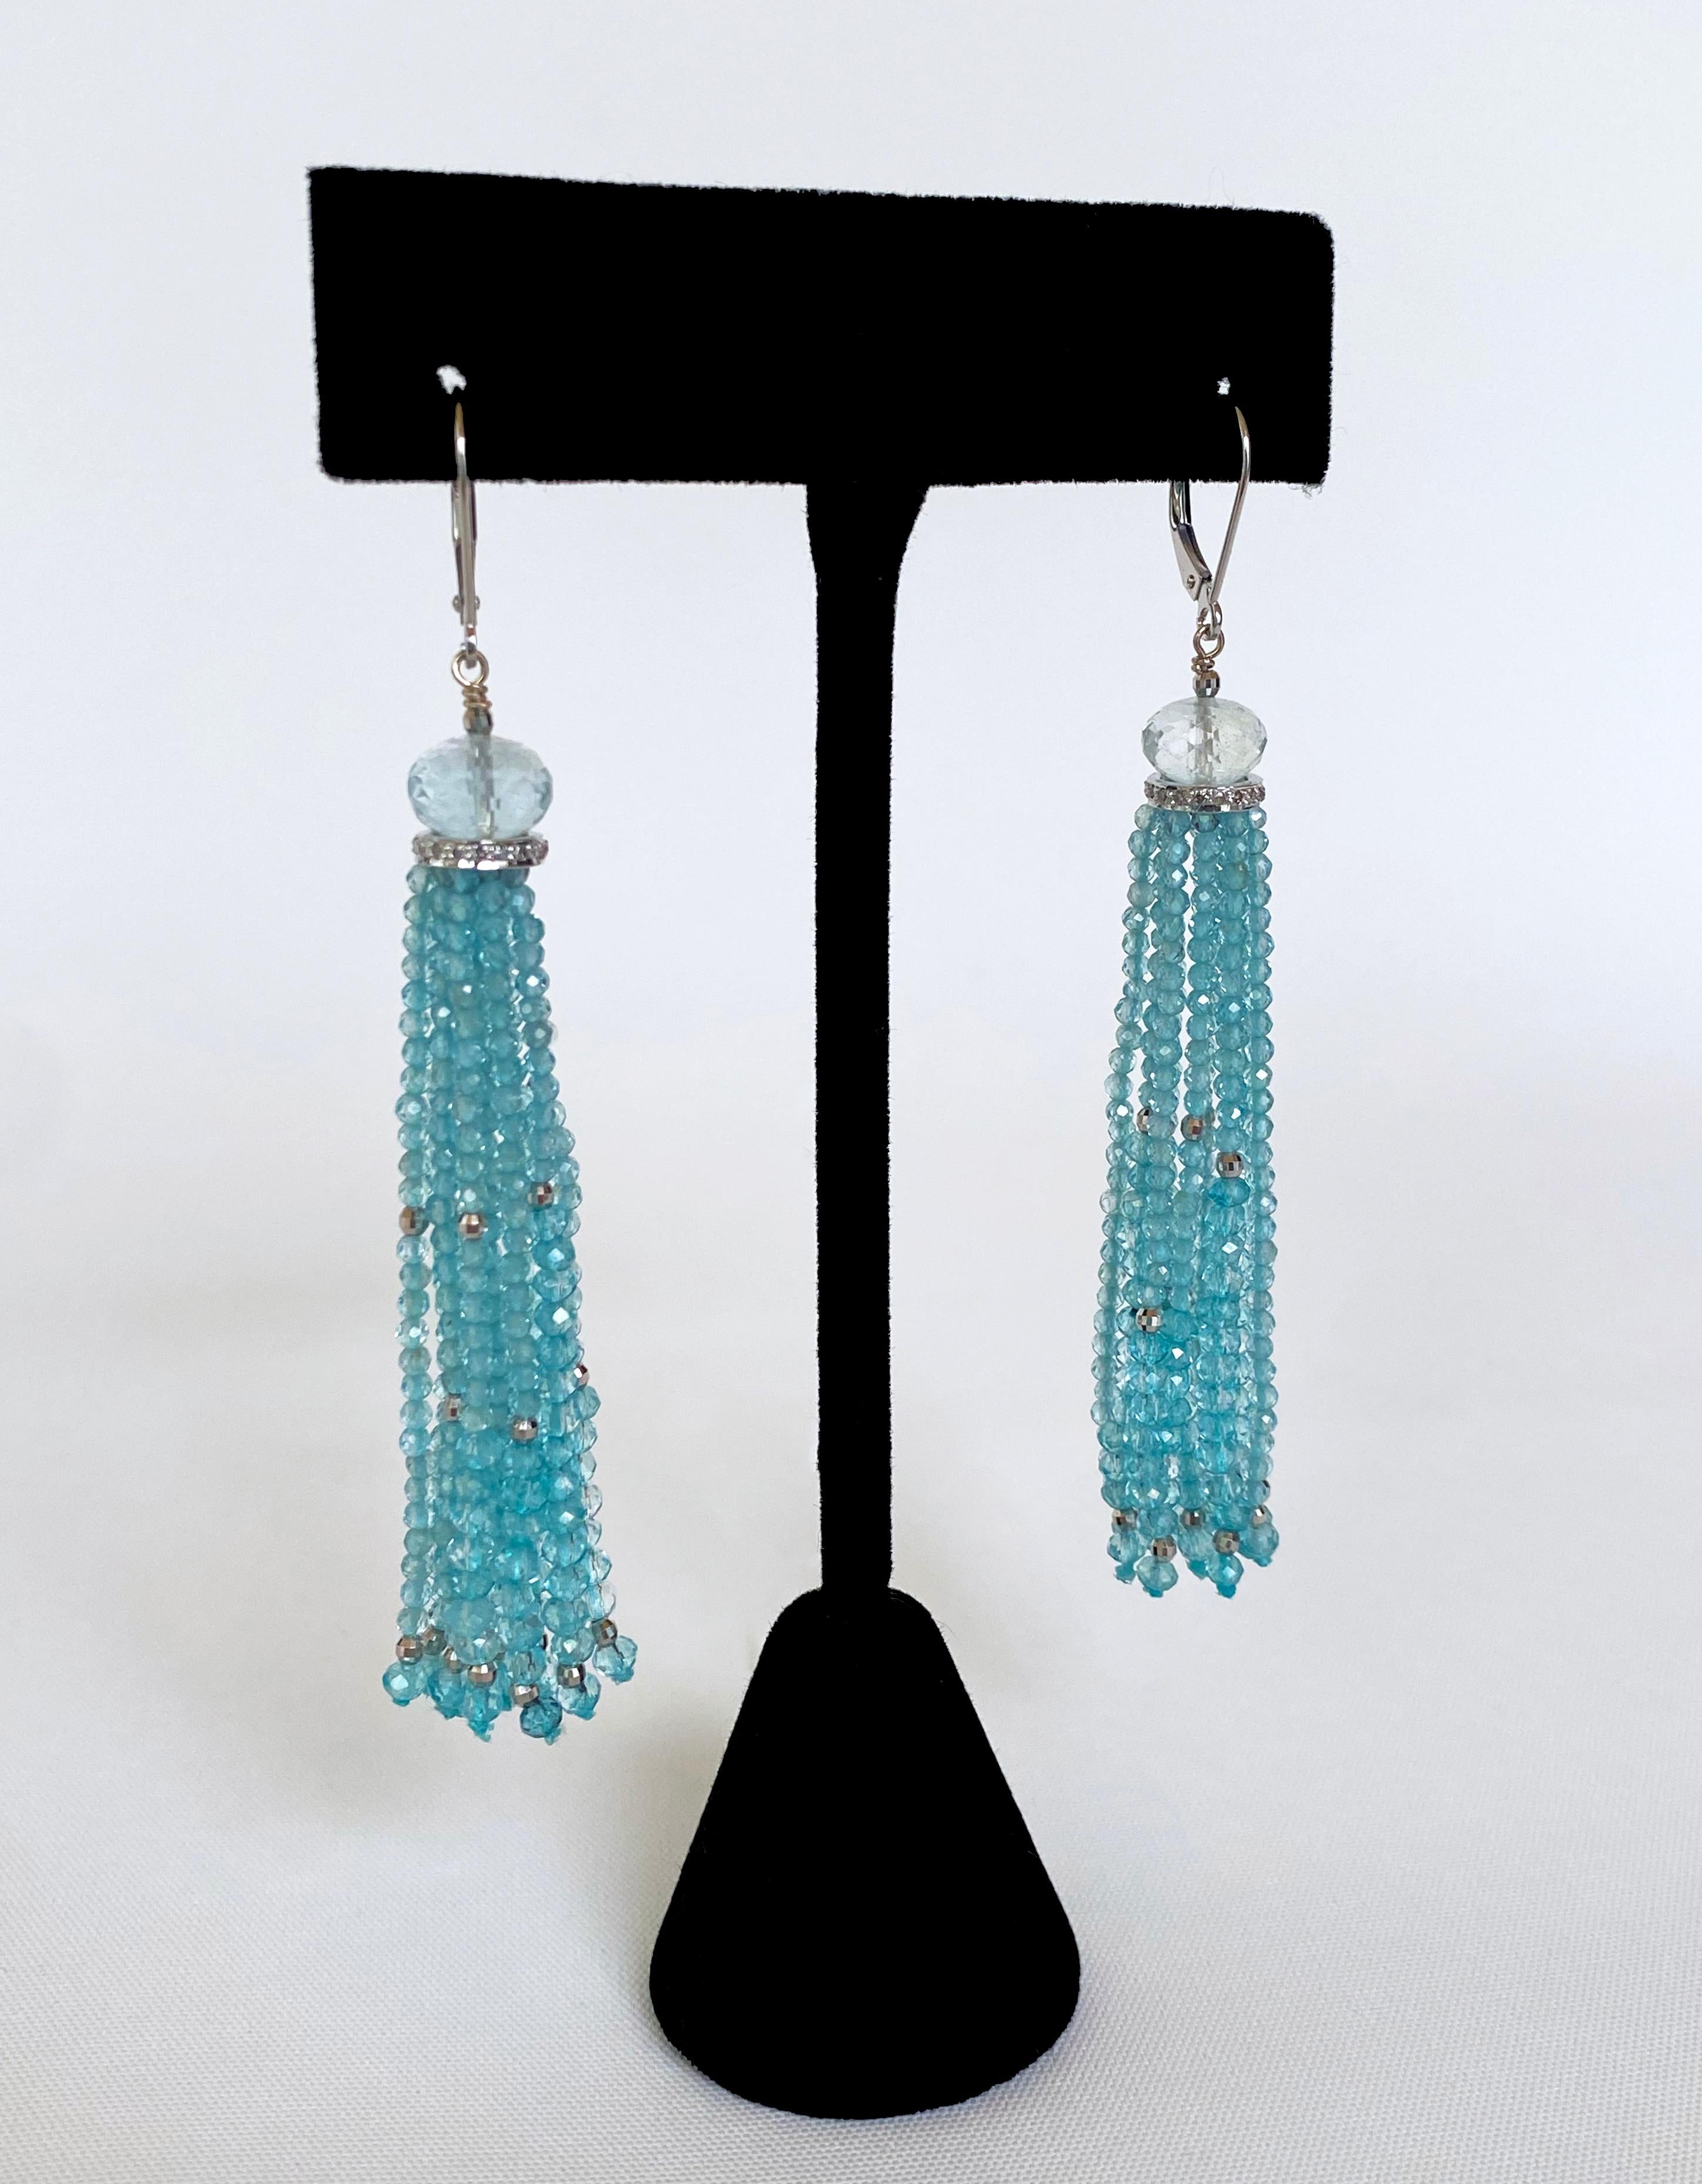 Colorfully bold Earrings by Marina J. This pair of Tassel Earrings feature faceted Aquamarine and solid 14k White Gold findings hanging from a Platinum plated Diamond encrusted Silver roundel - which a larger Aquamarine stone sits atop. The